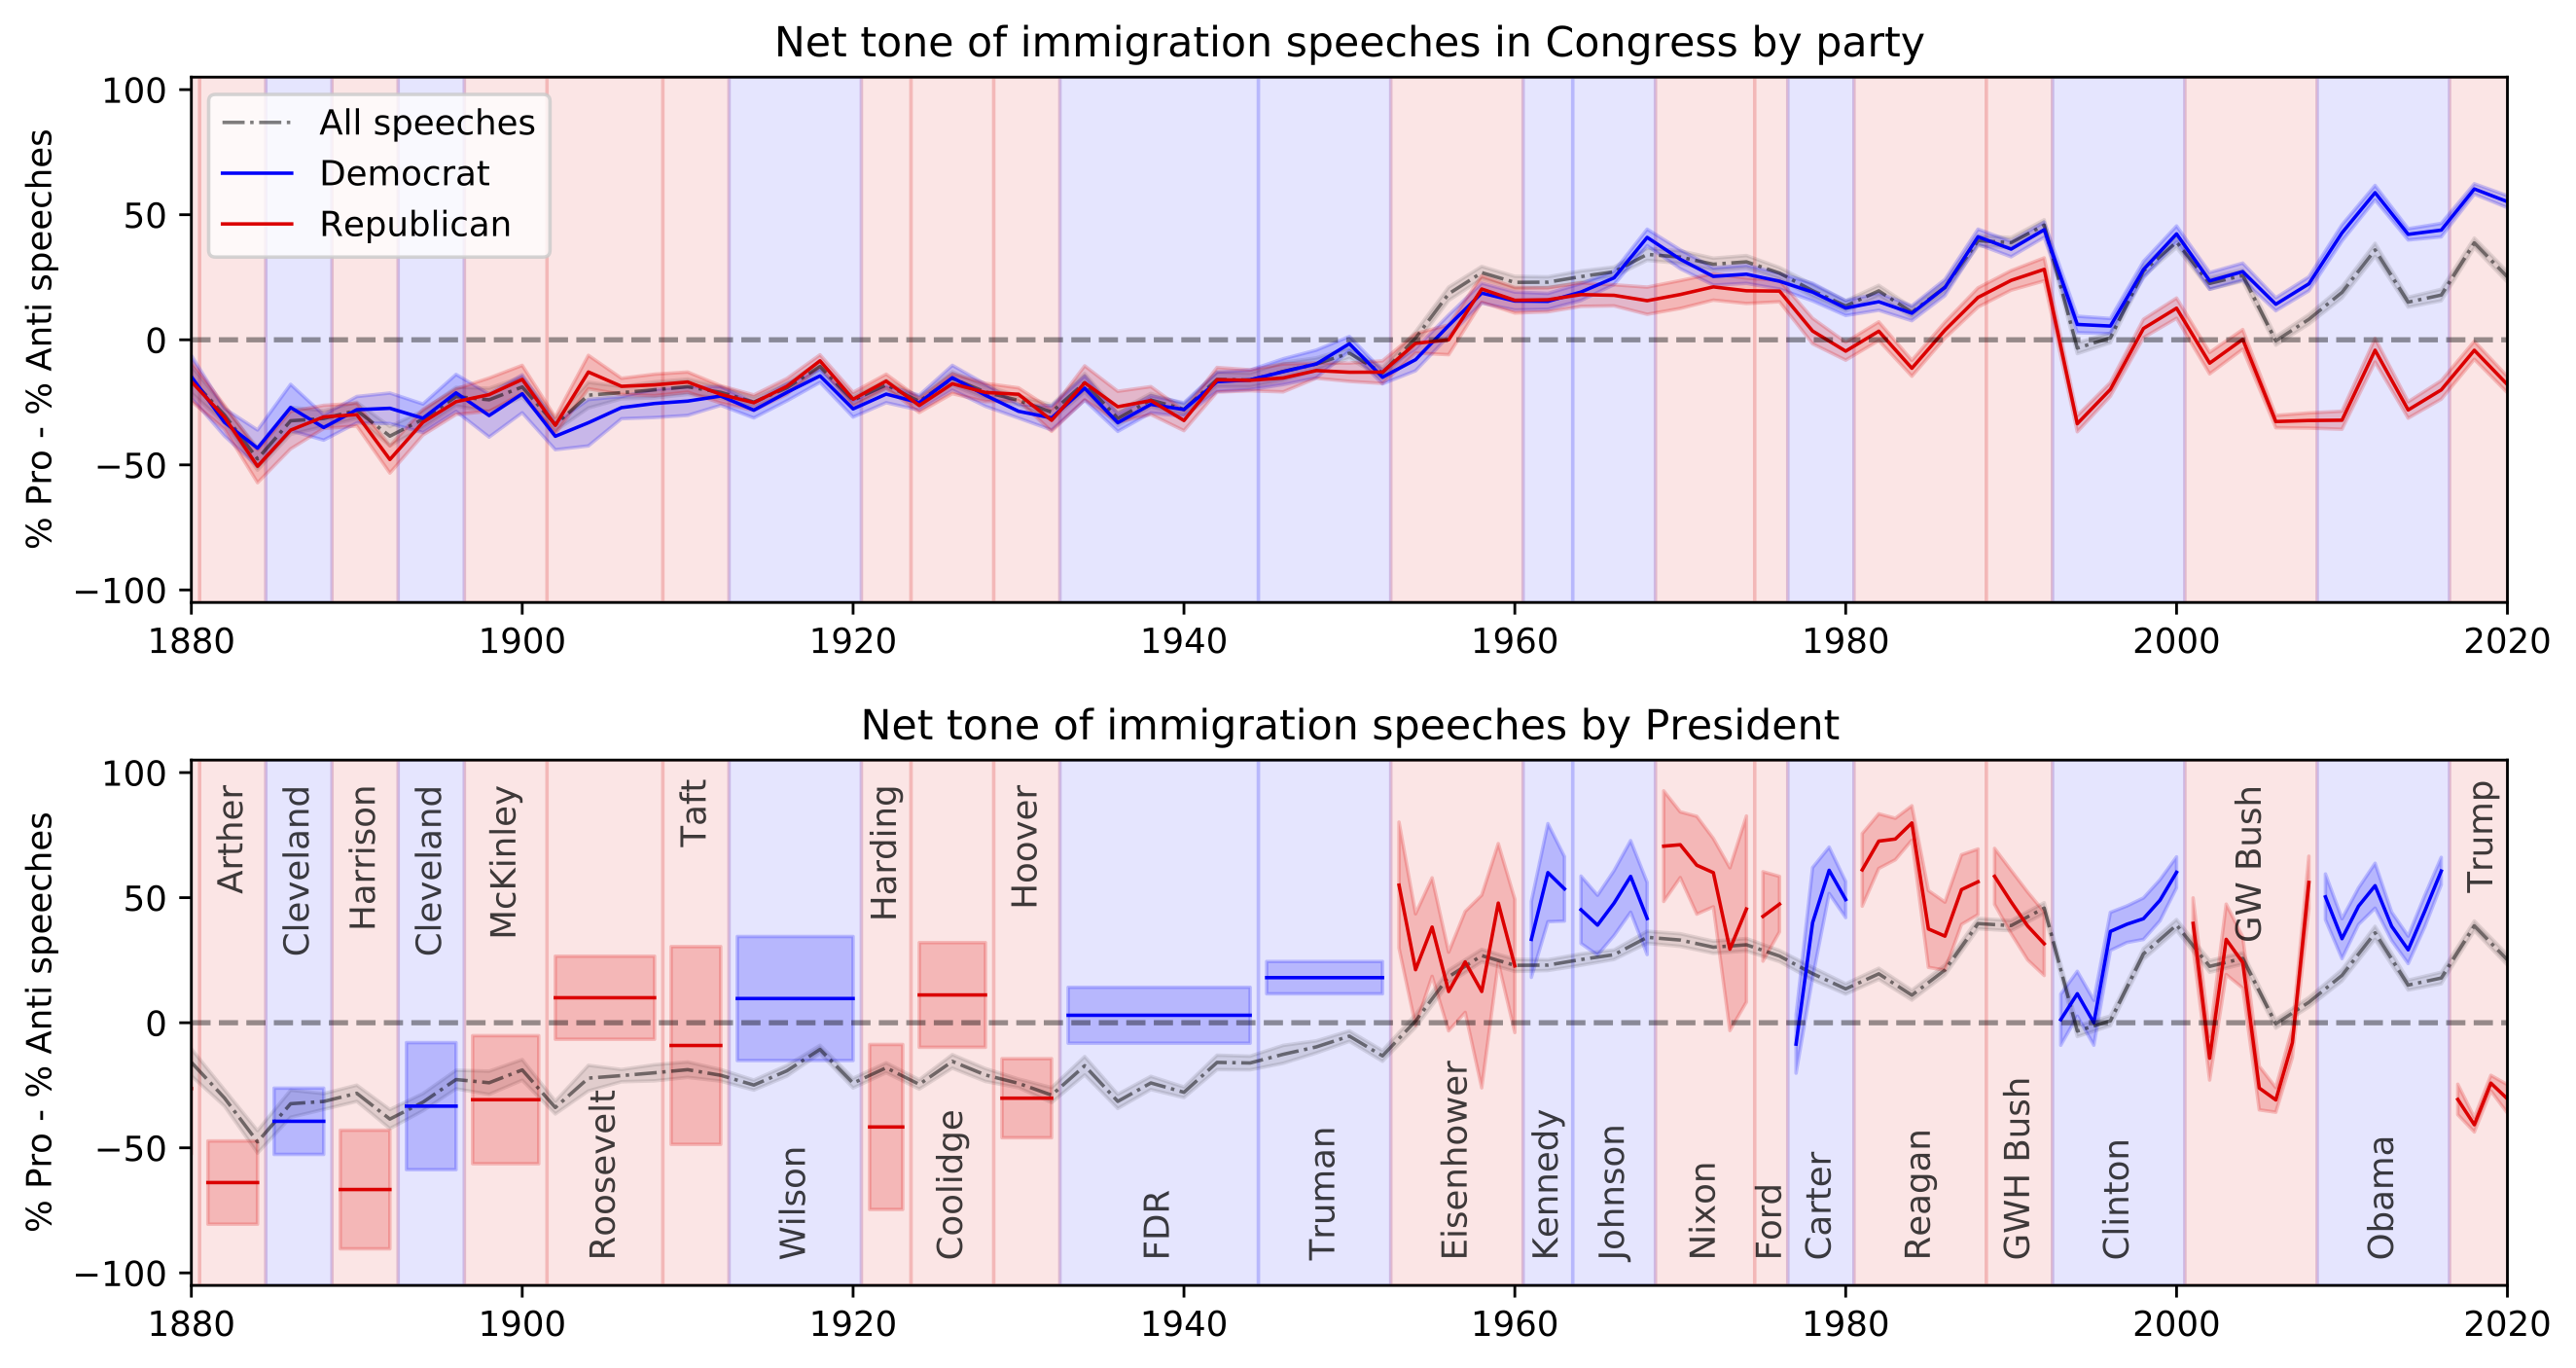 Net tone of immigration speeches over time